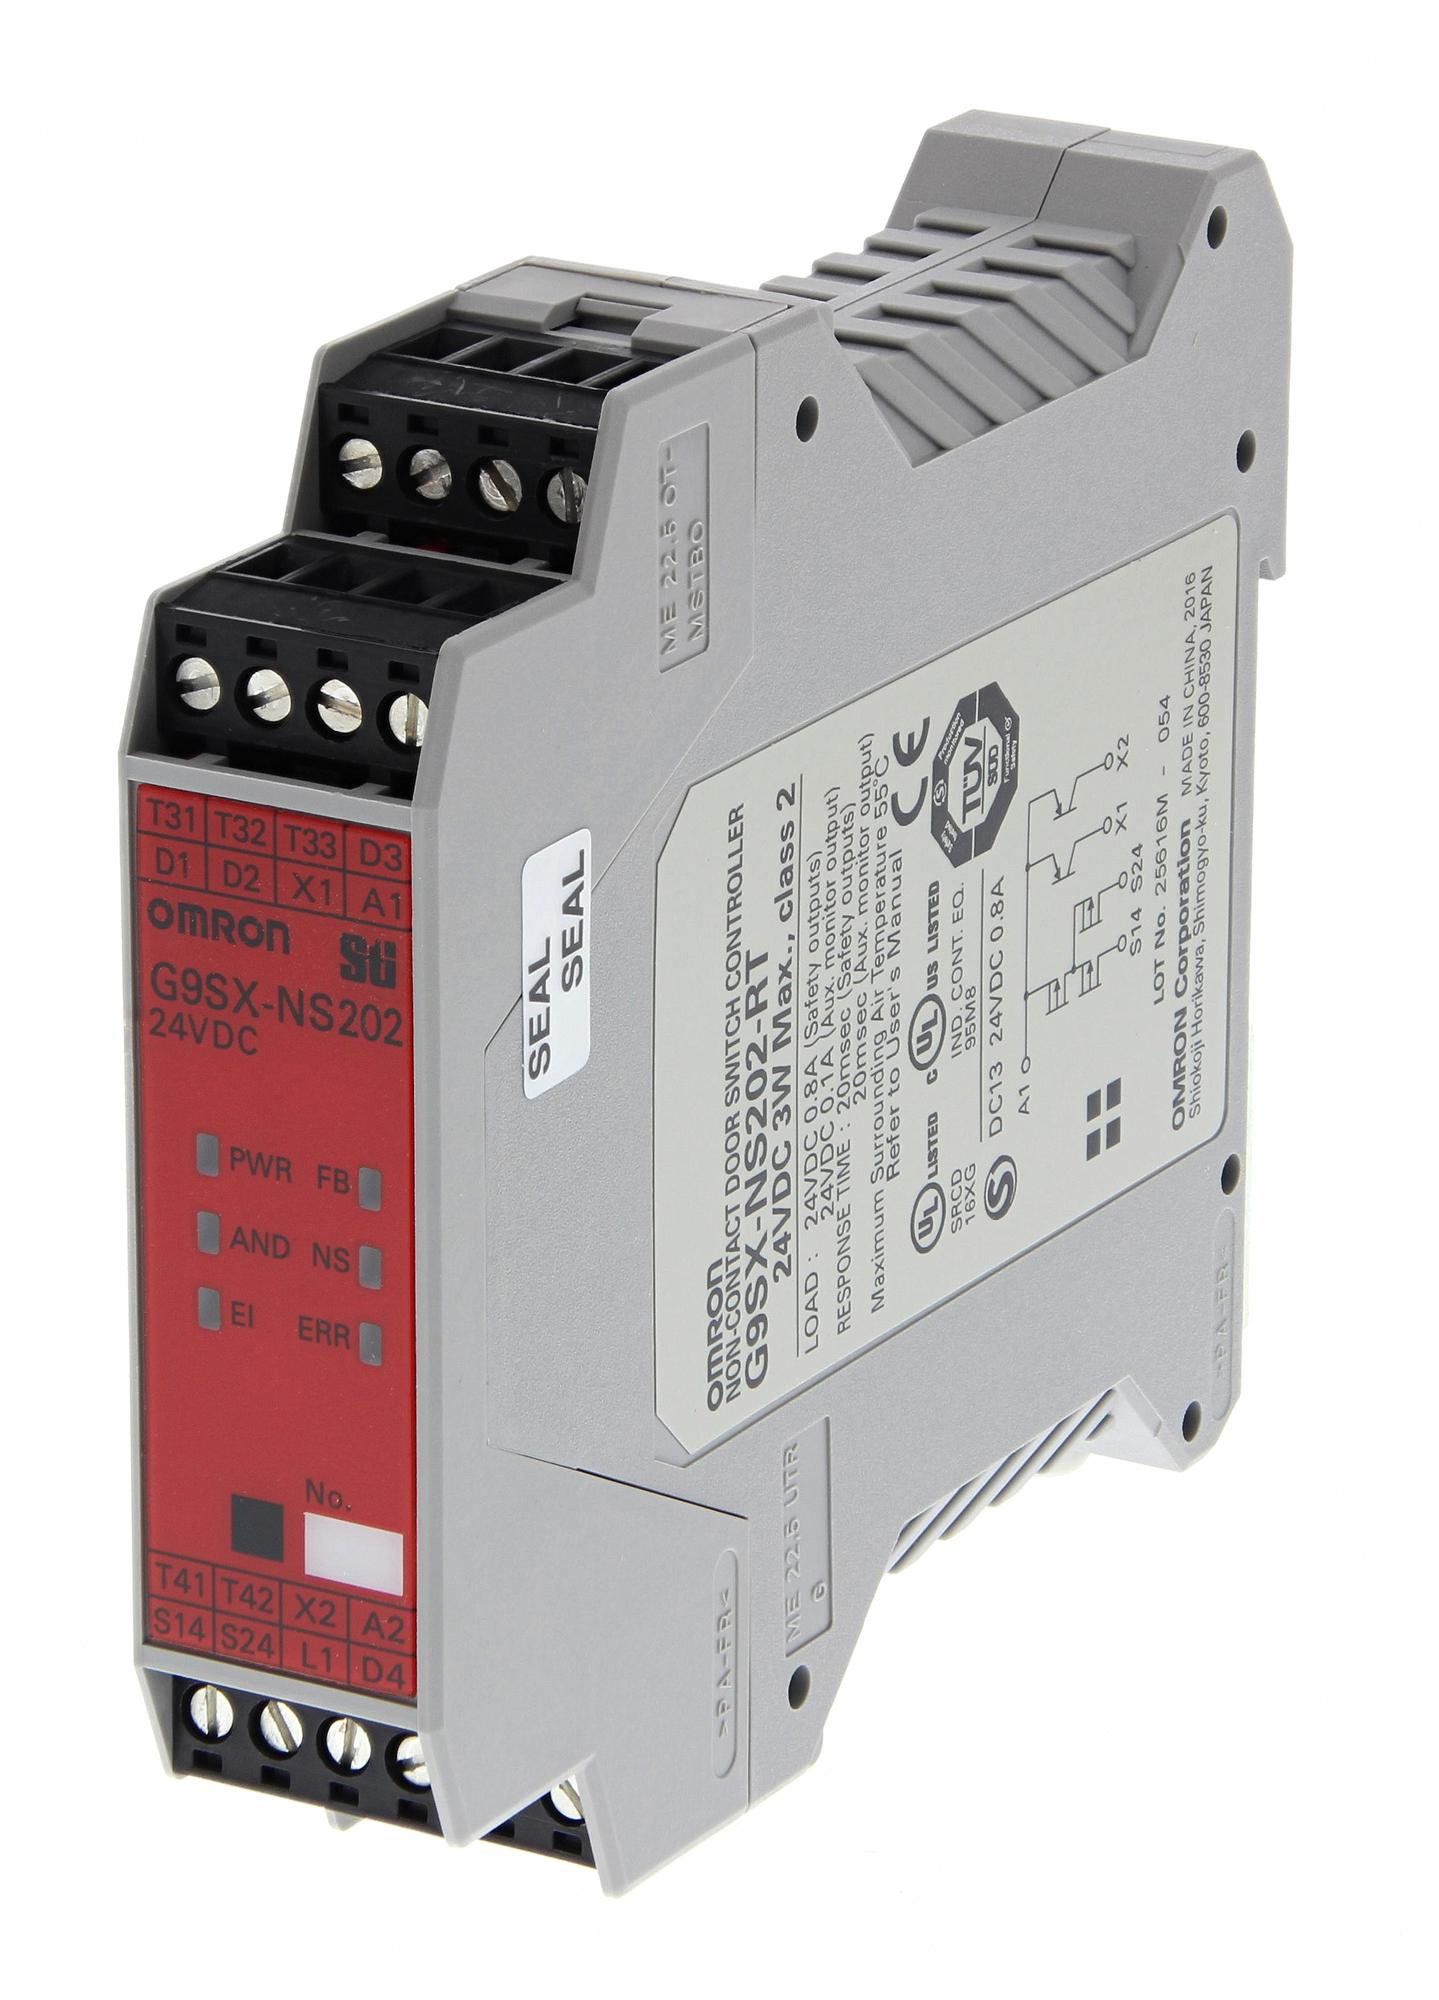 G9SX-NS202-RT  DC24 SAFETY RELAY, 24VDC, DIN RAIL OMRON